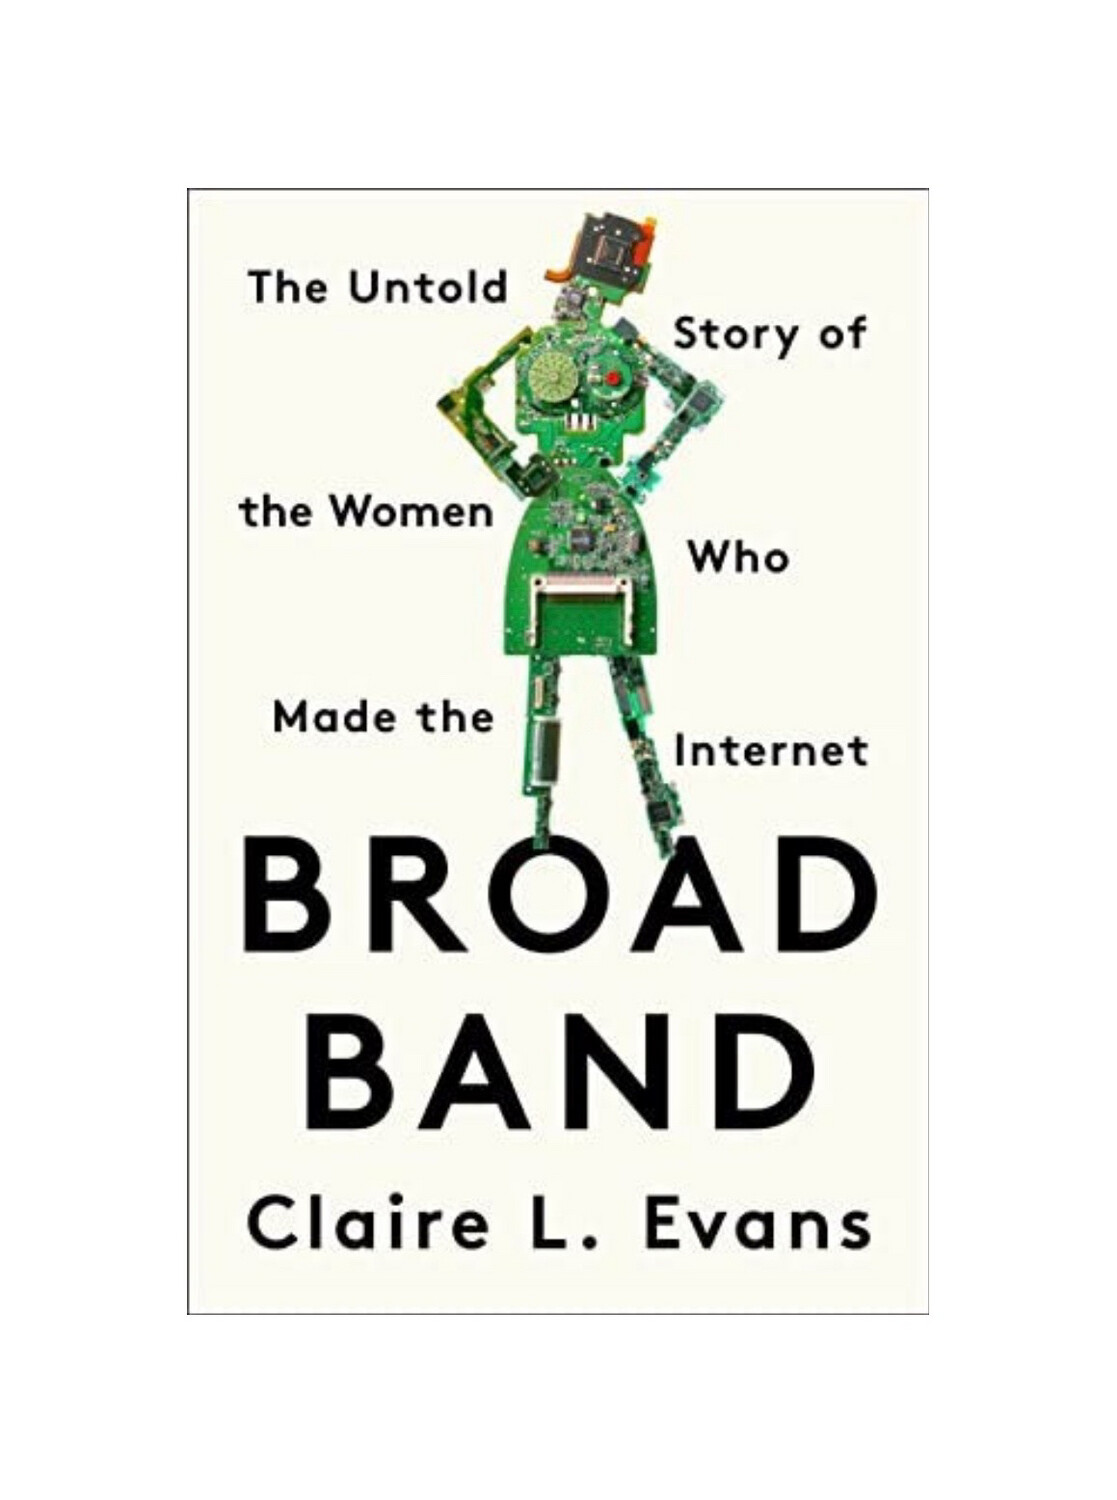 Broad Band by Claire L. Evans